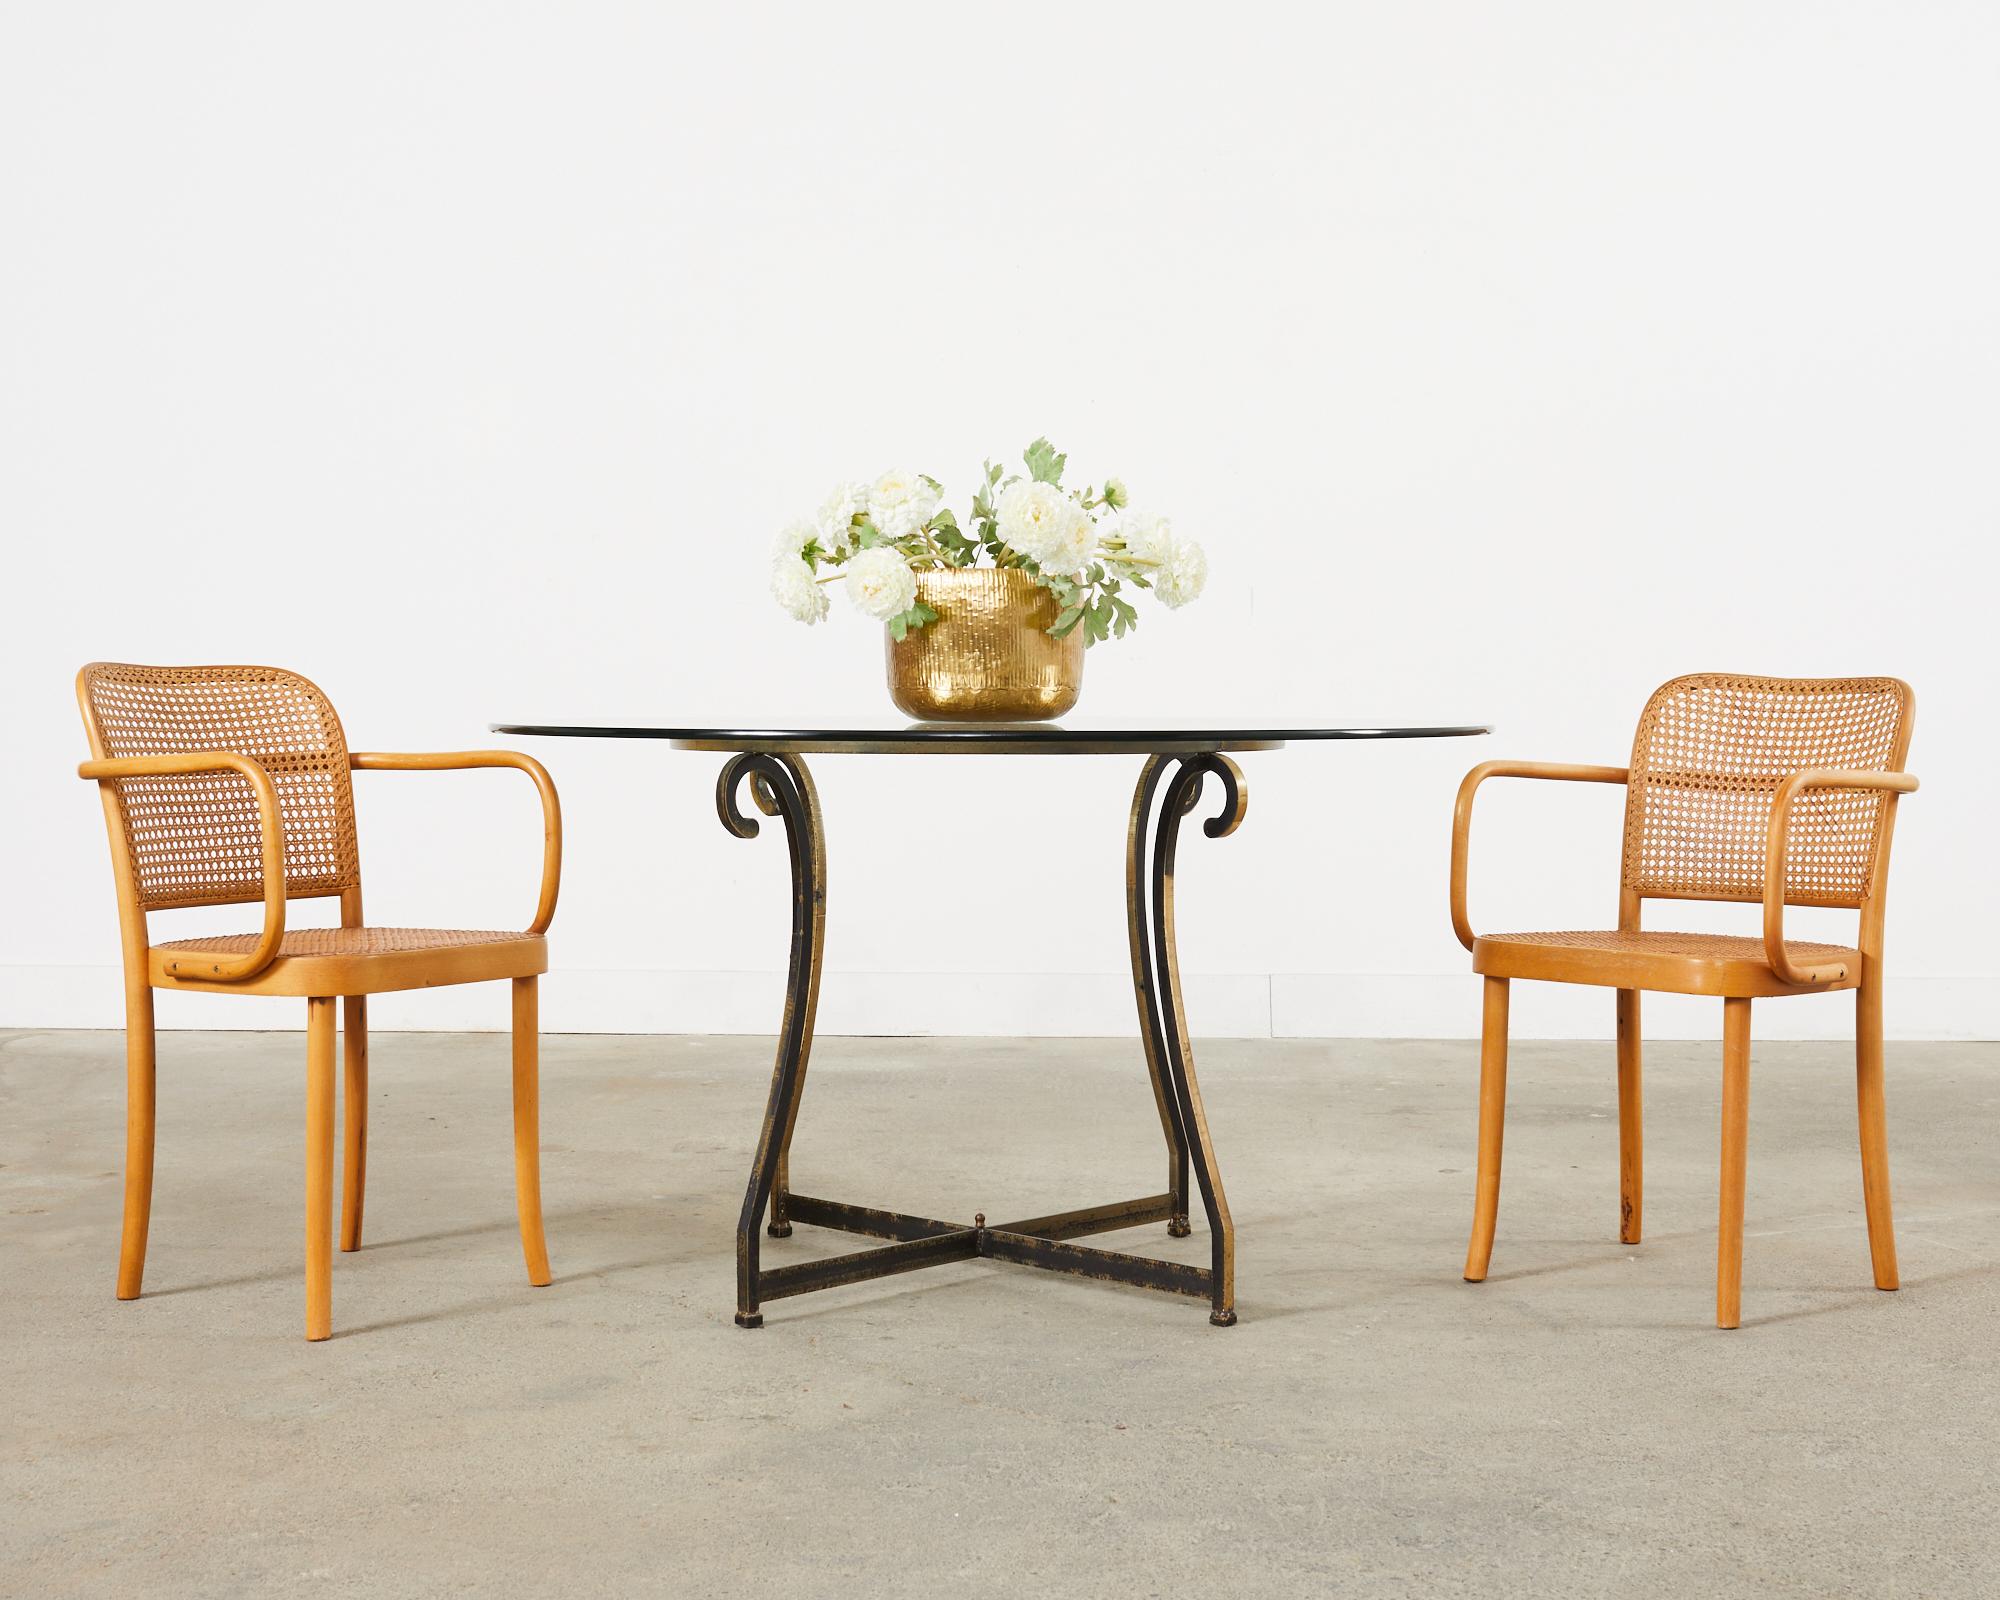 Rare pair of No. 811 Thonet chairs or Prague chairs designed by Josef Hoffman. The chairs feature an iconic bentwood frame design with square shaped arms and a caned seat and back. Excellent joinery and craftsmanship given age and use with a